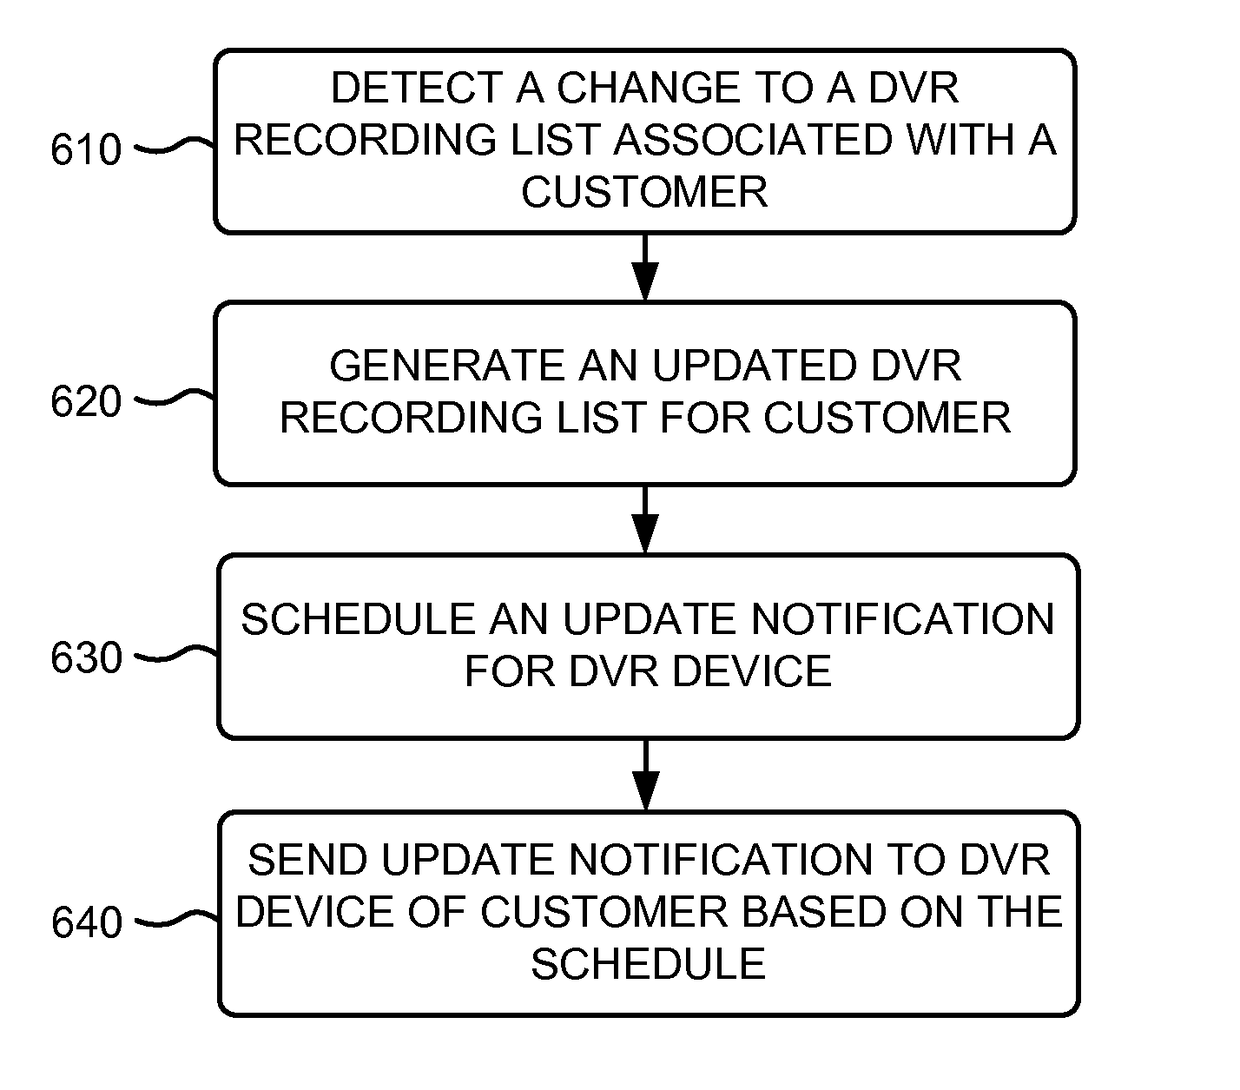 Intelligent scheduling of DVR commands and DVR client status updates